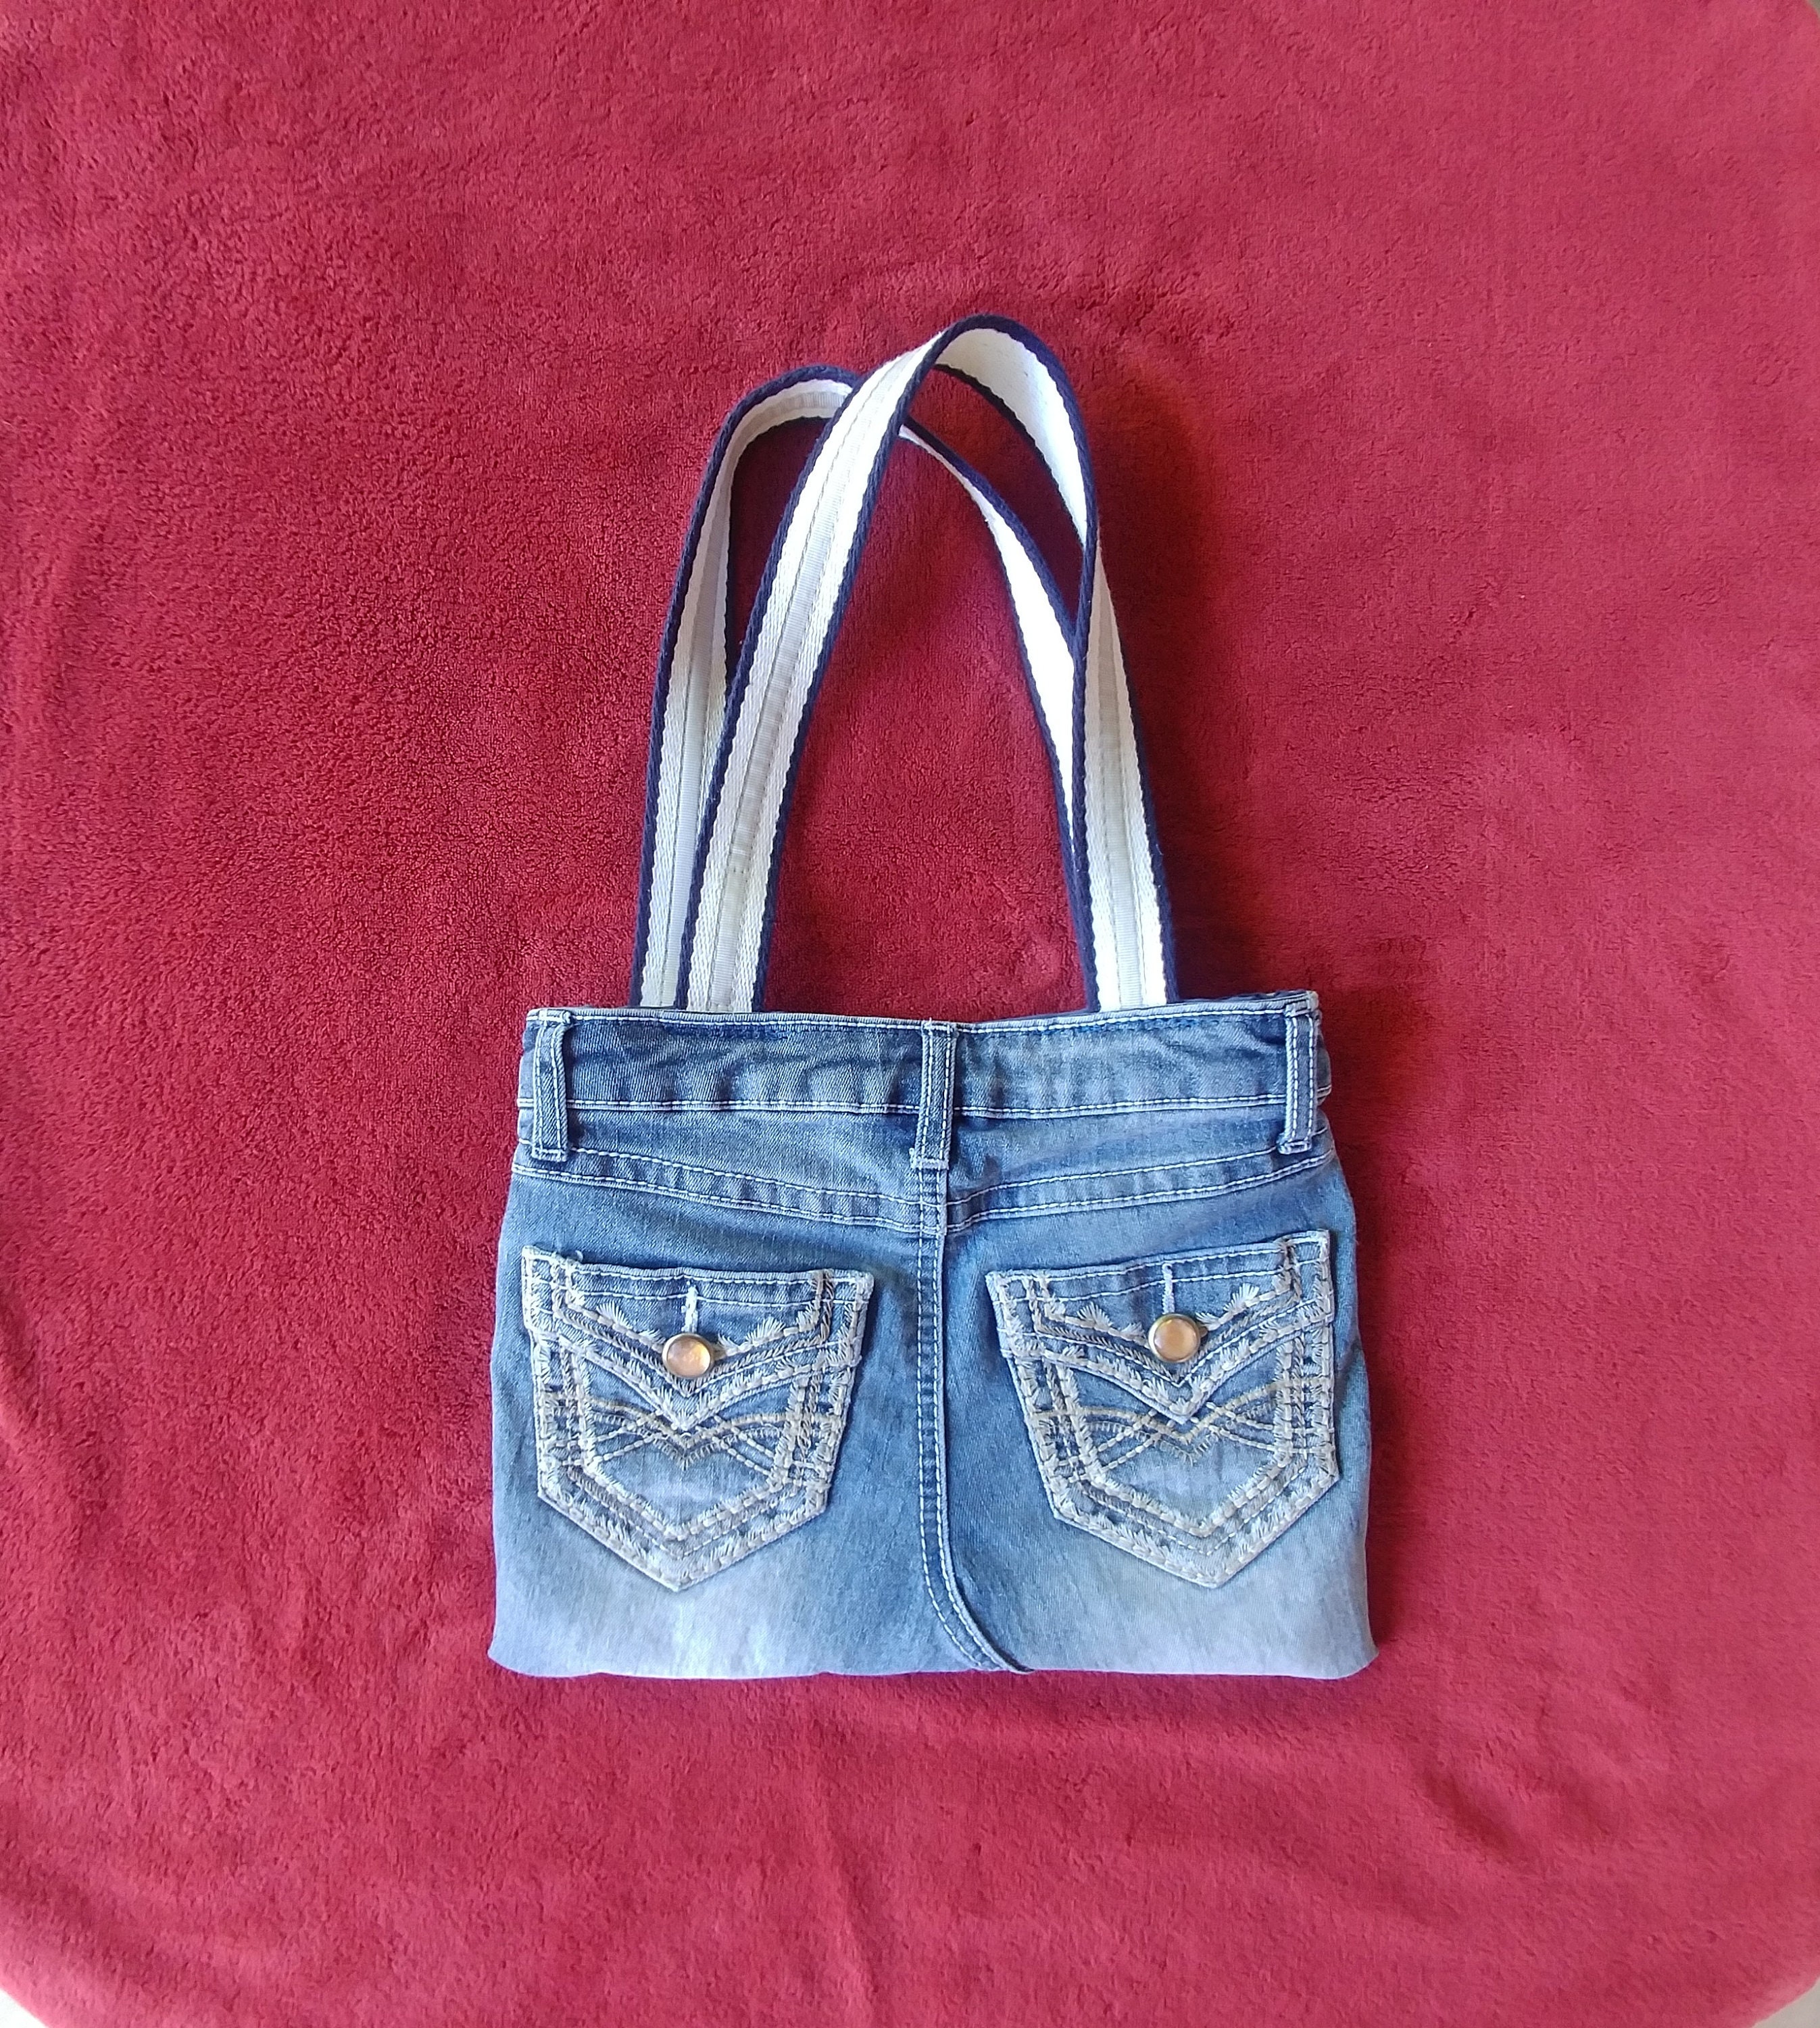 Old Jeans Purse Designed by Patti Dunn Paper Sewing Pattern - Etsy